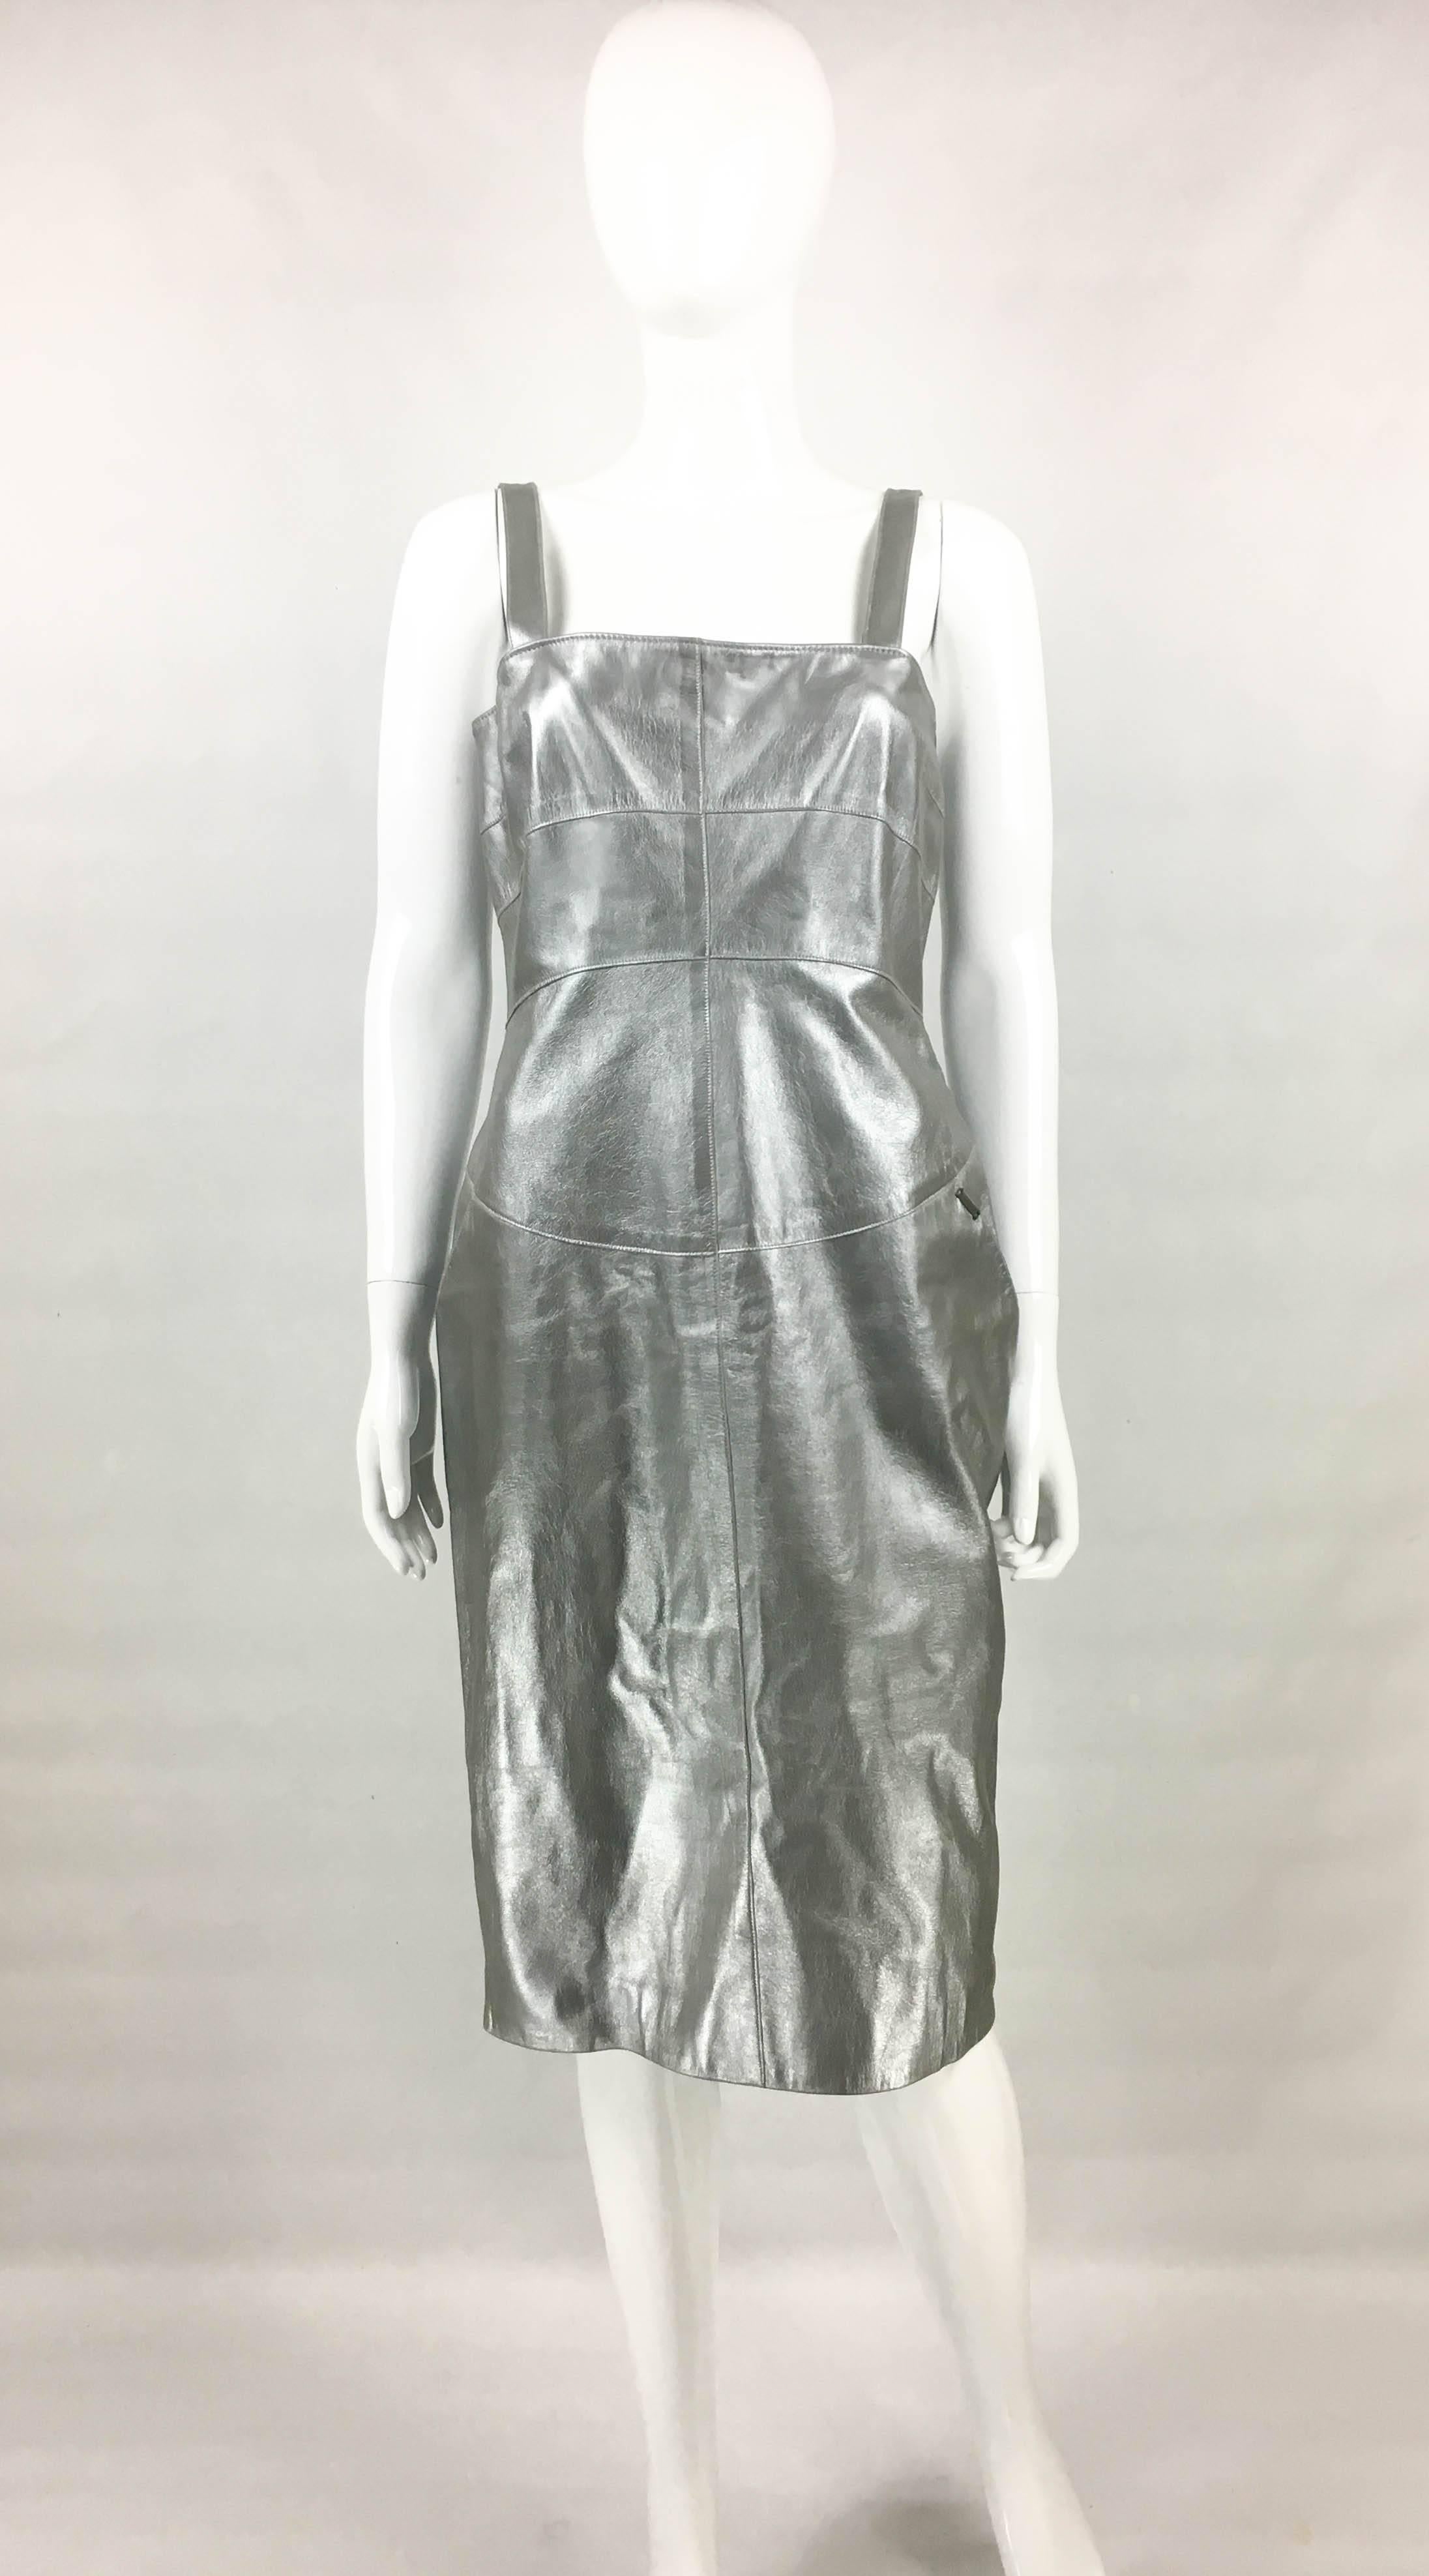 Vintage Chanel Runway Look Silver Leather Dress. This striking dress by Chanel was created for the 1999 Autumn Winter runway show – please refer to photos for a sister dress being worn on the runway. Crafted in silver lambskin, it has a futurist